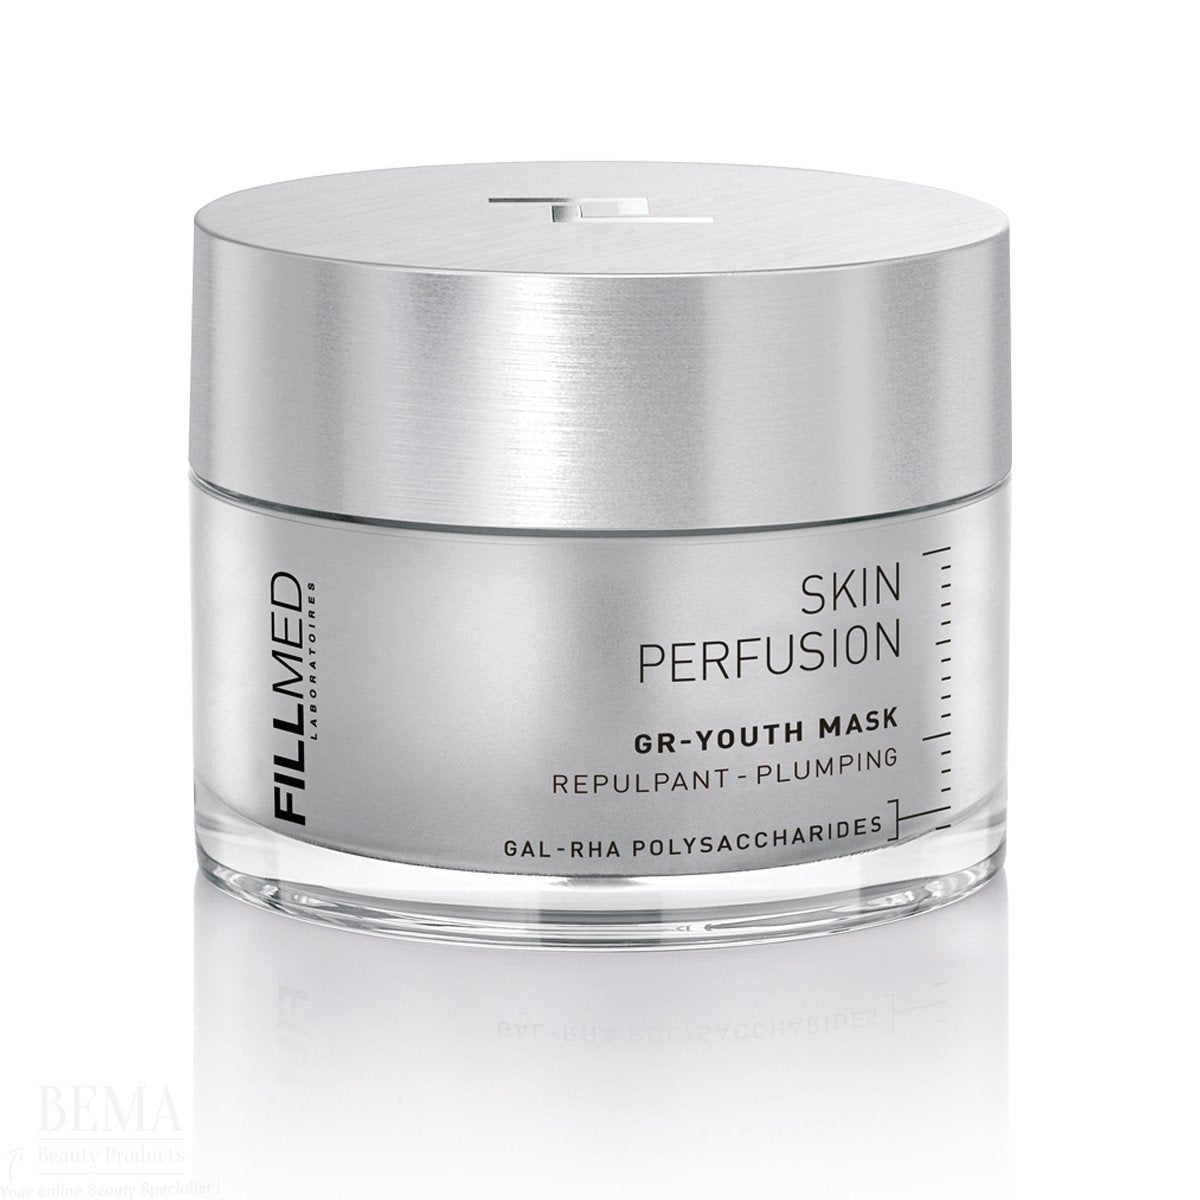 Fillmed Skin Perfusion - GR Youth mask 50 ml